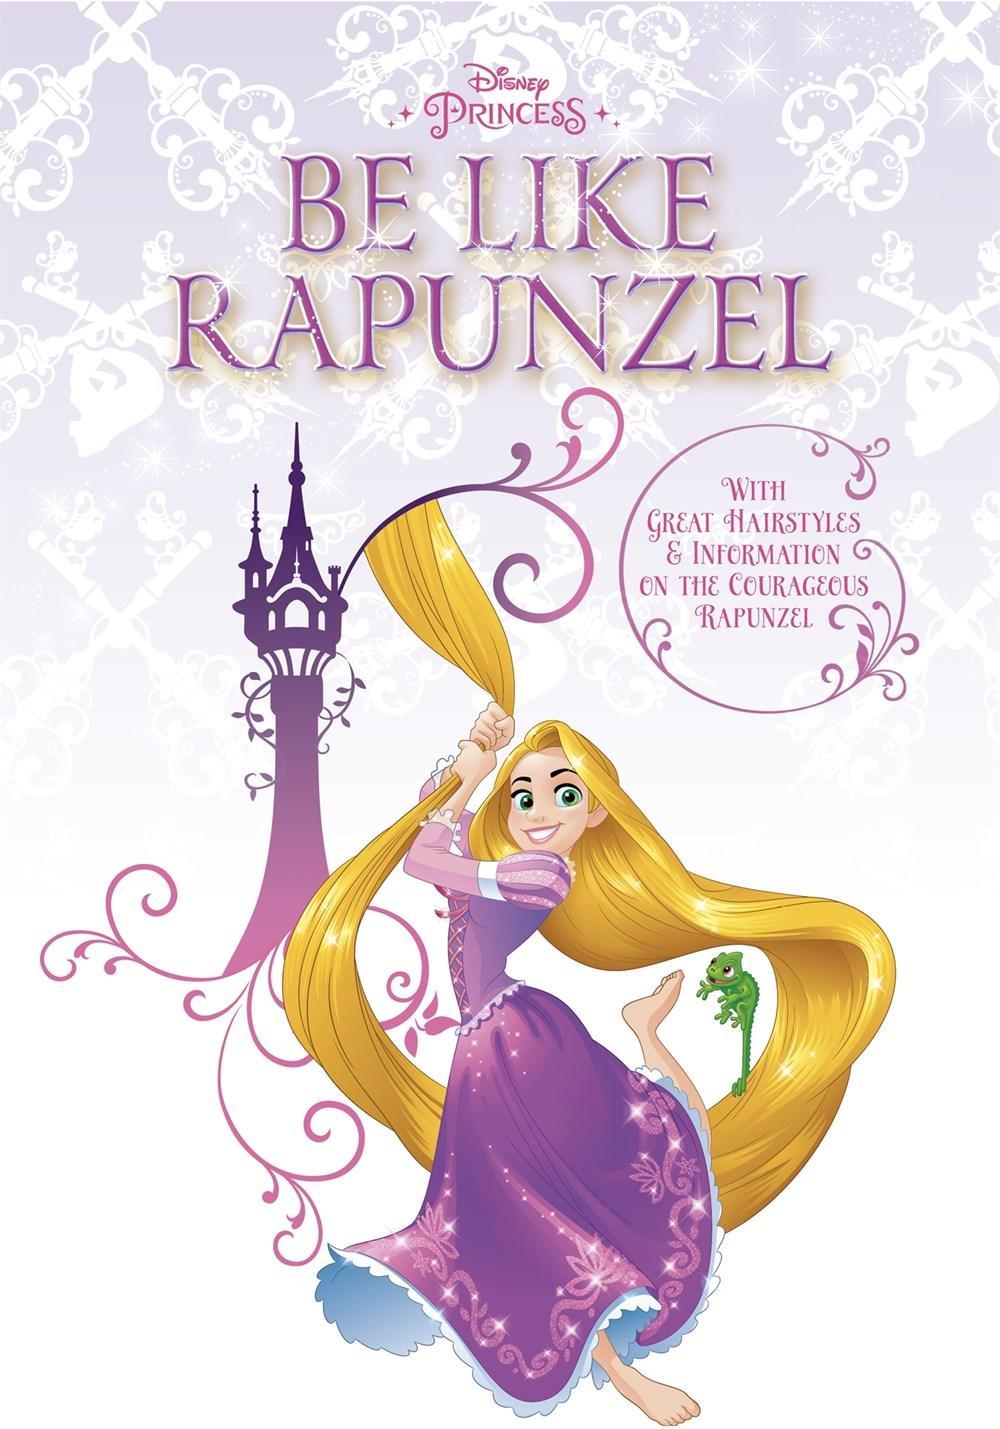 EDDA USA JULY 2017 Be Like Rapunzel If you have ever envied Rapunzel of her flowy locks, this is the book for you. In this fantastic new book you learn how to copy Rapunzel's look.